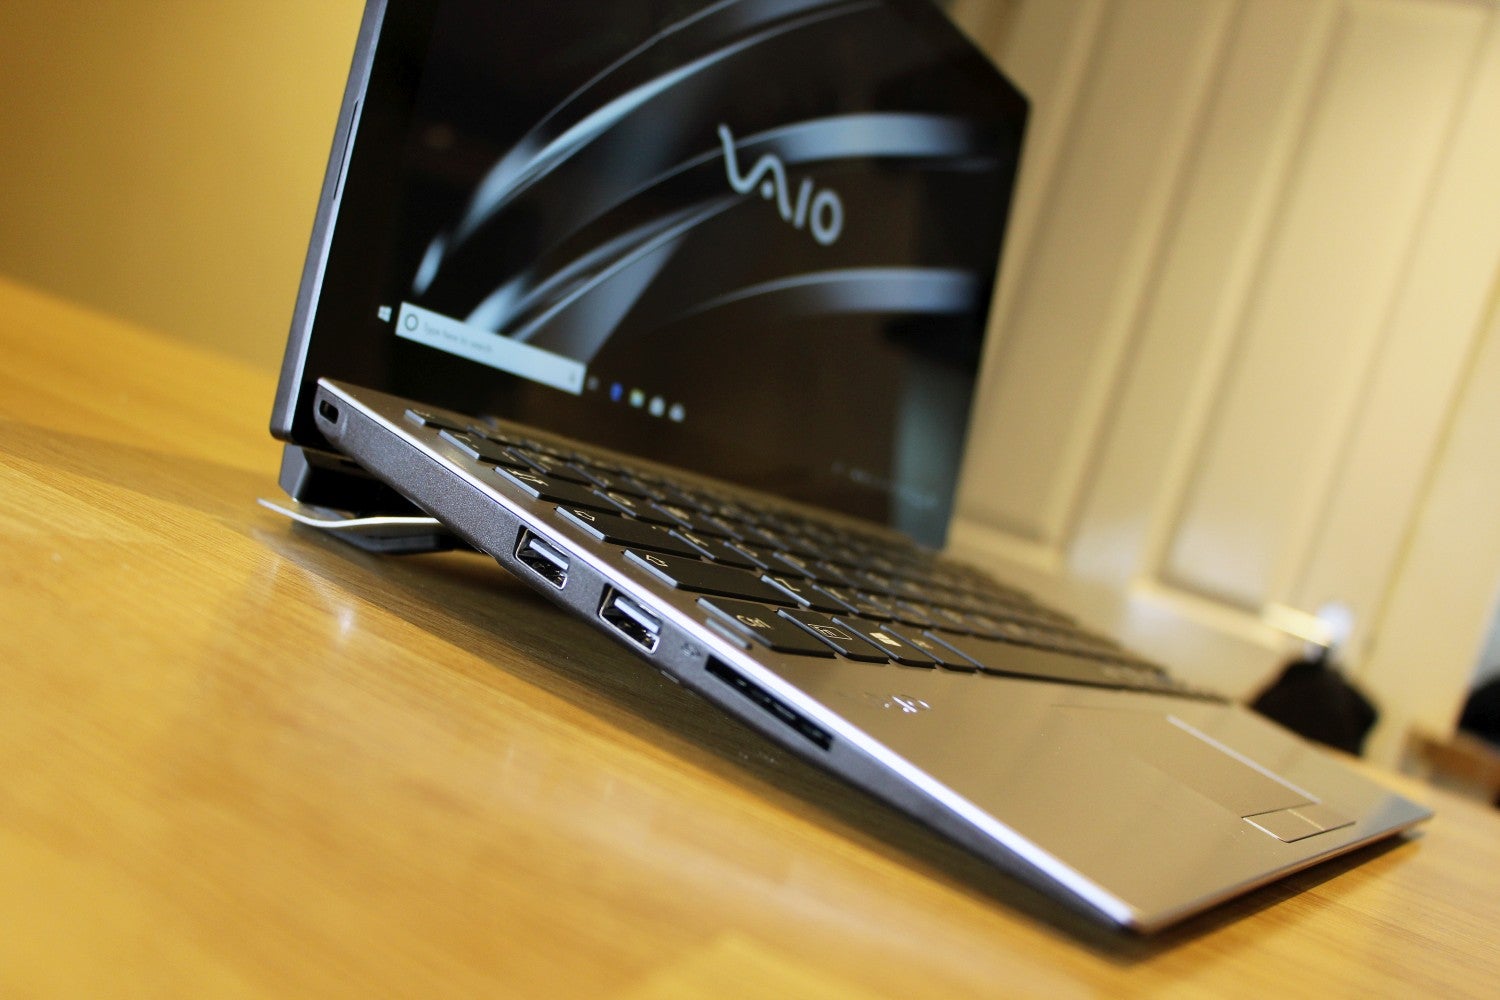 VAIO A12 Review | Trusted Reviews